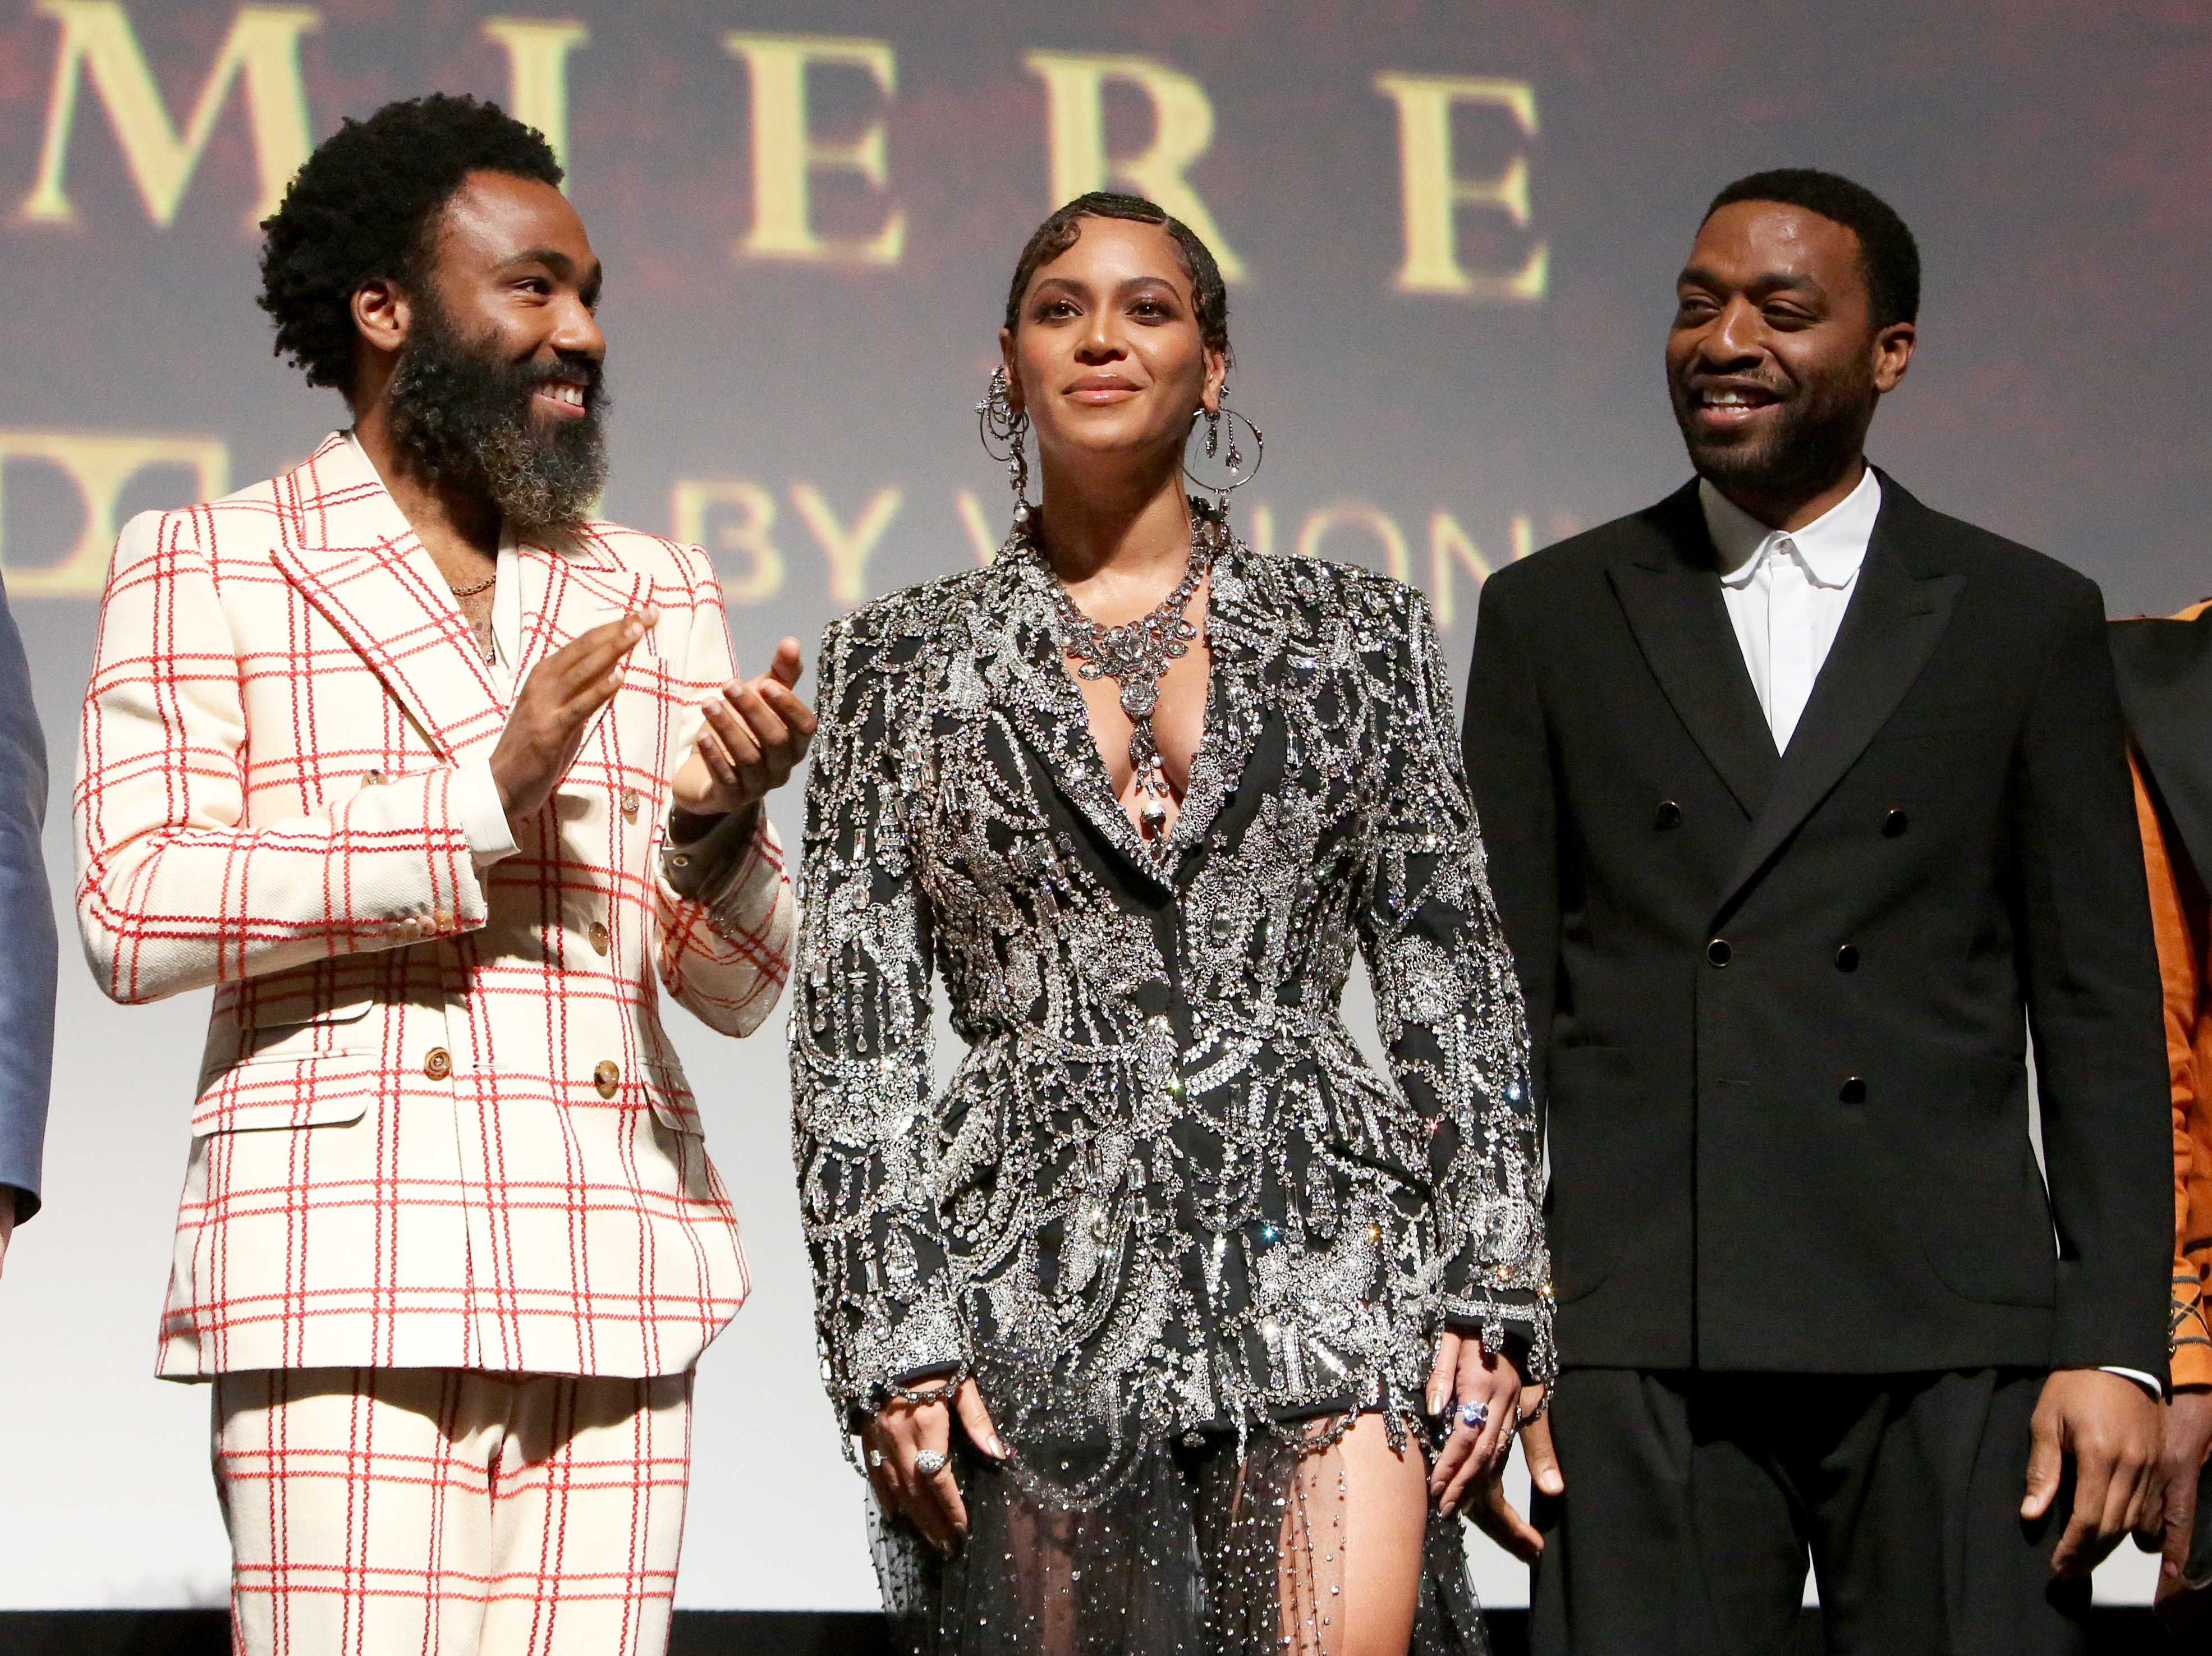 Did Beyoncé Shade Donald Glover During Her “RENAISSANCE” Opening Show? Twitter Thinks So